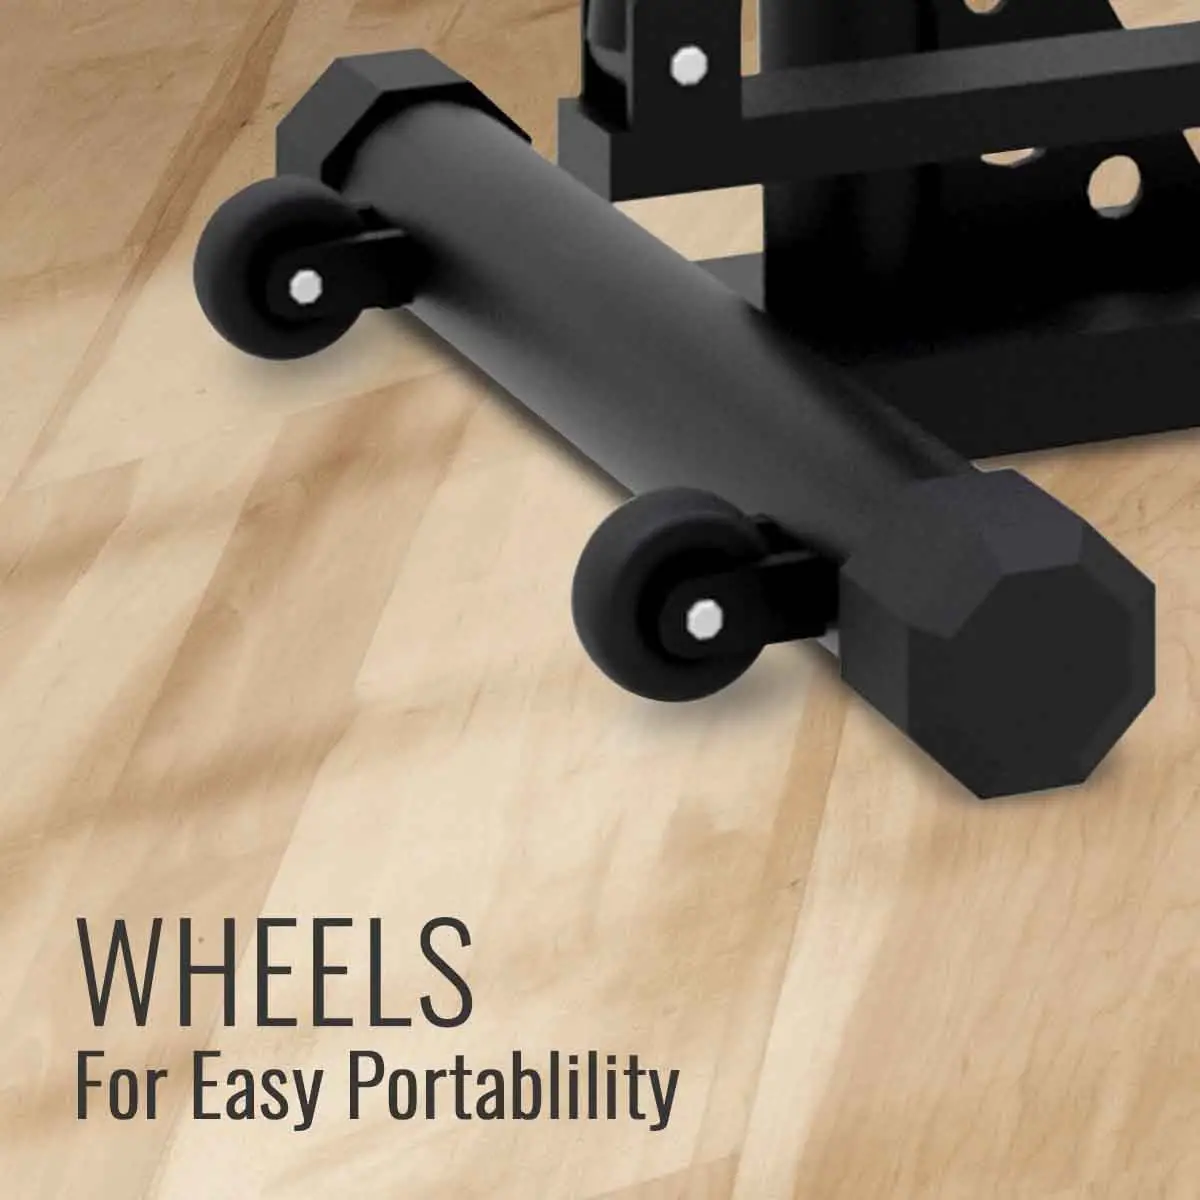 Durafit Cross Trainer EB002 with wheels for easy portability